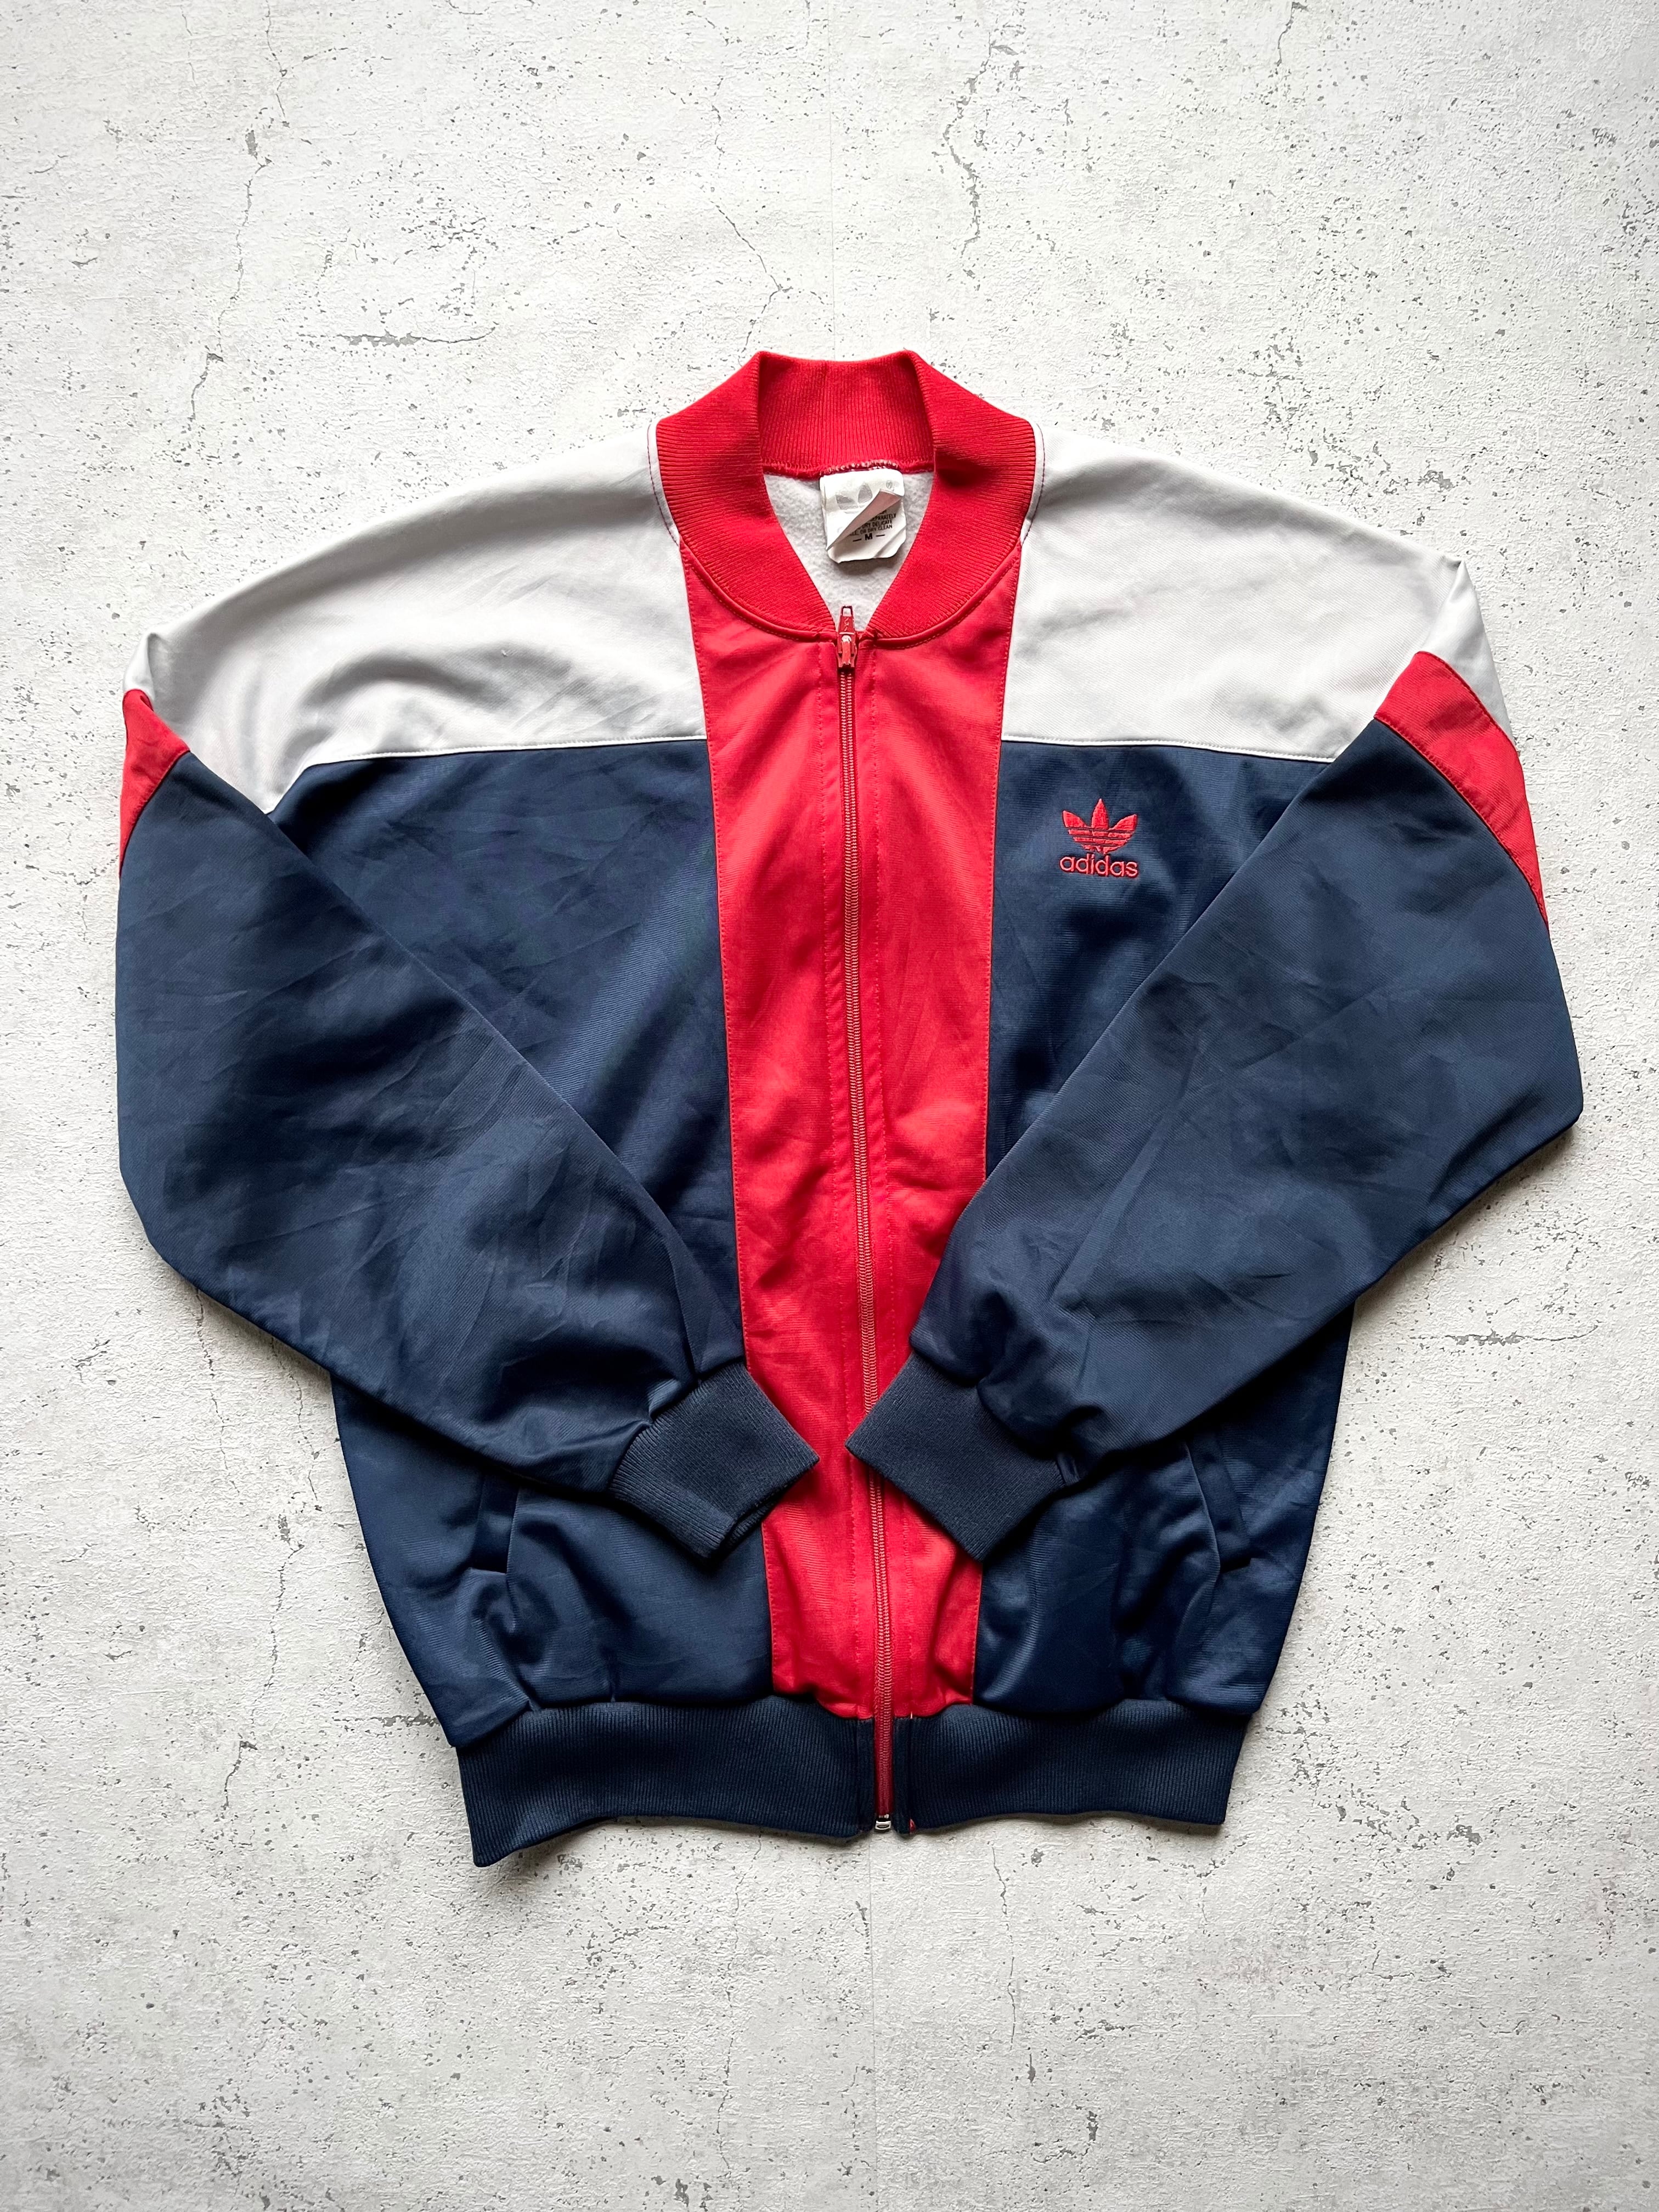 80s USA製 ADIDAS TRUCK JACKET TRICOLORE OLD VINTAGE アメリカ製